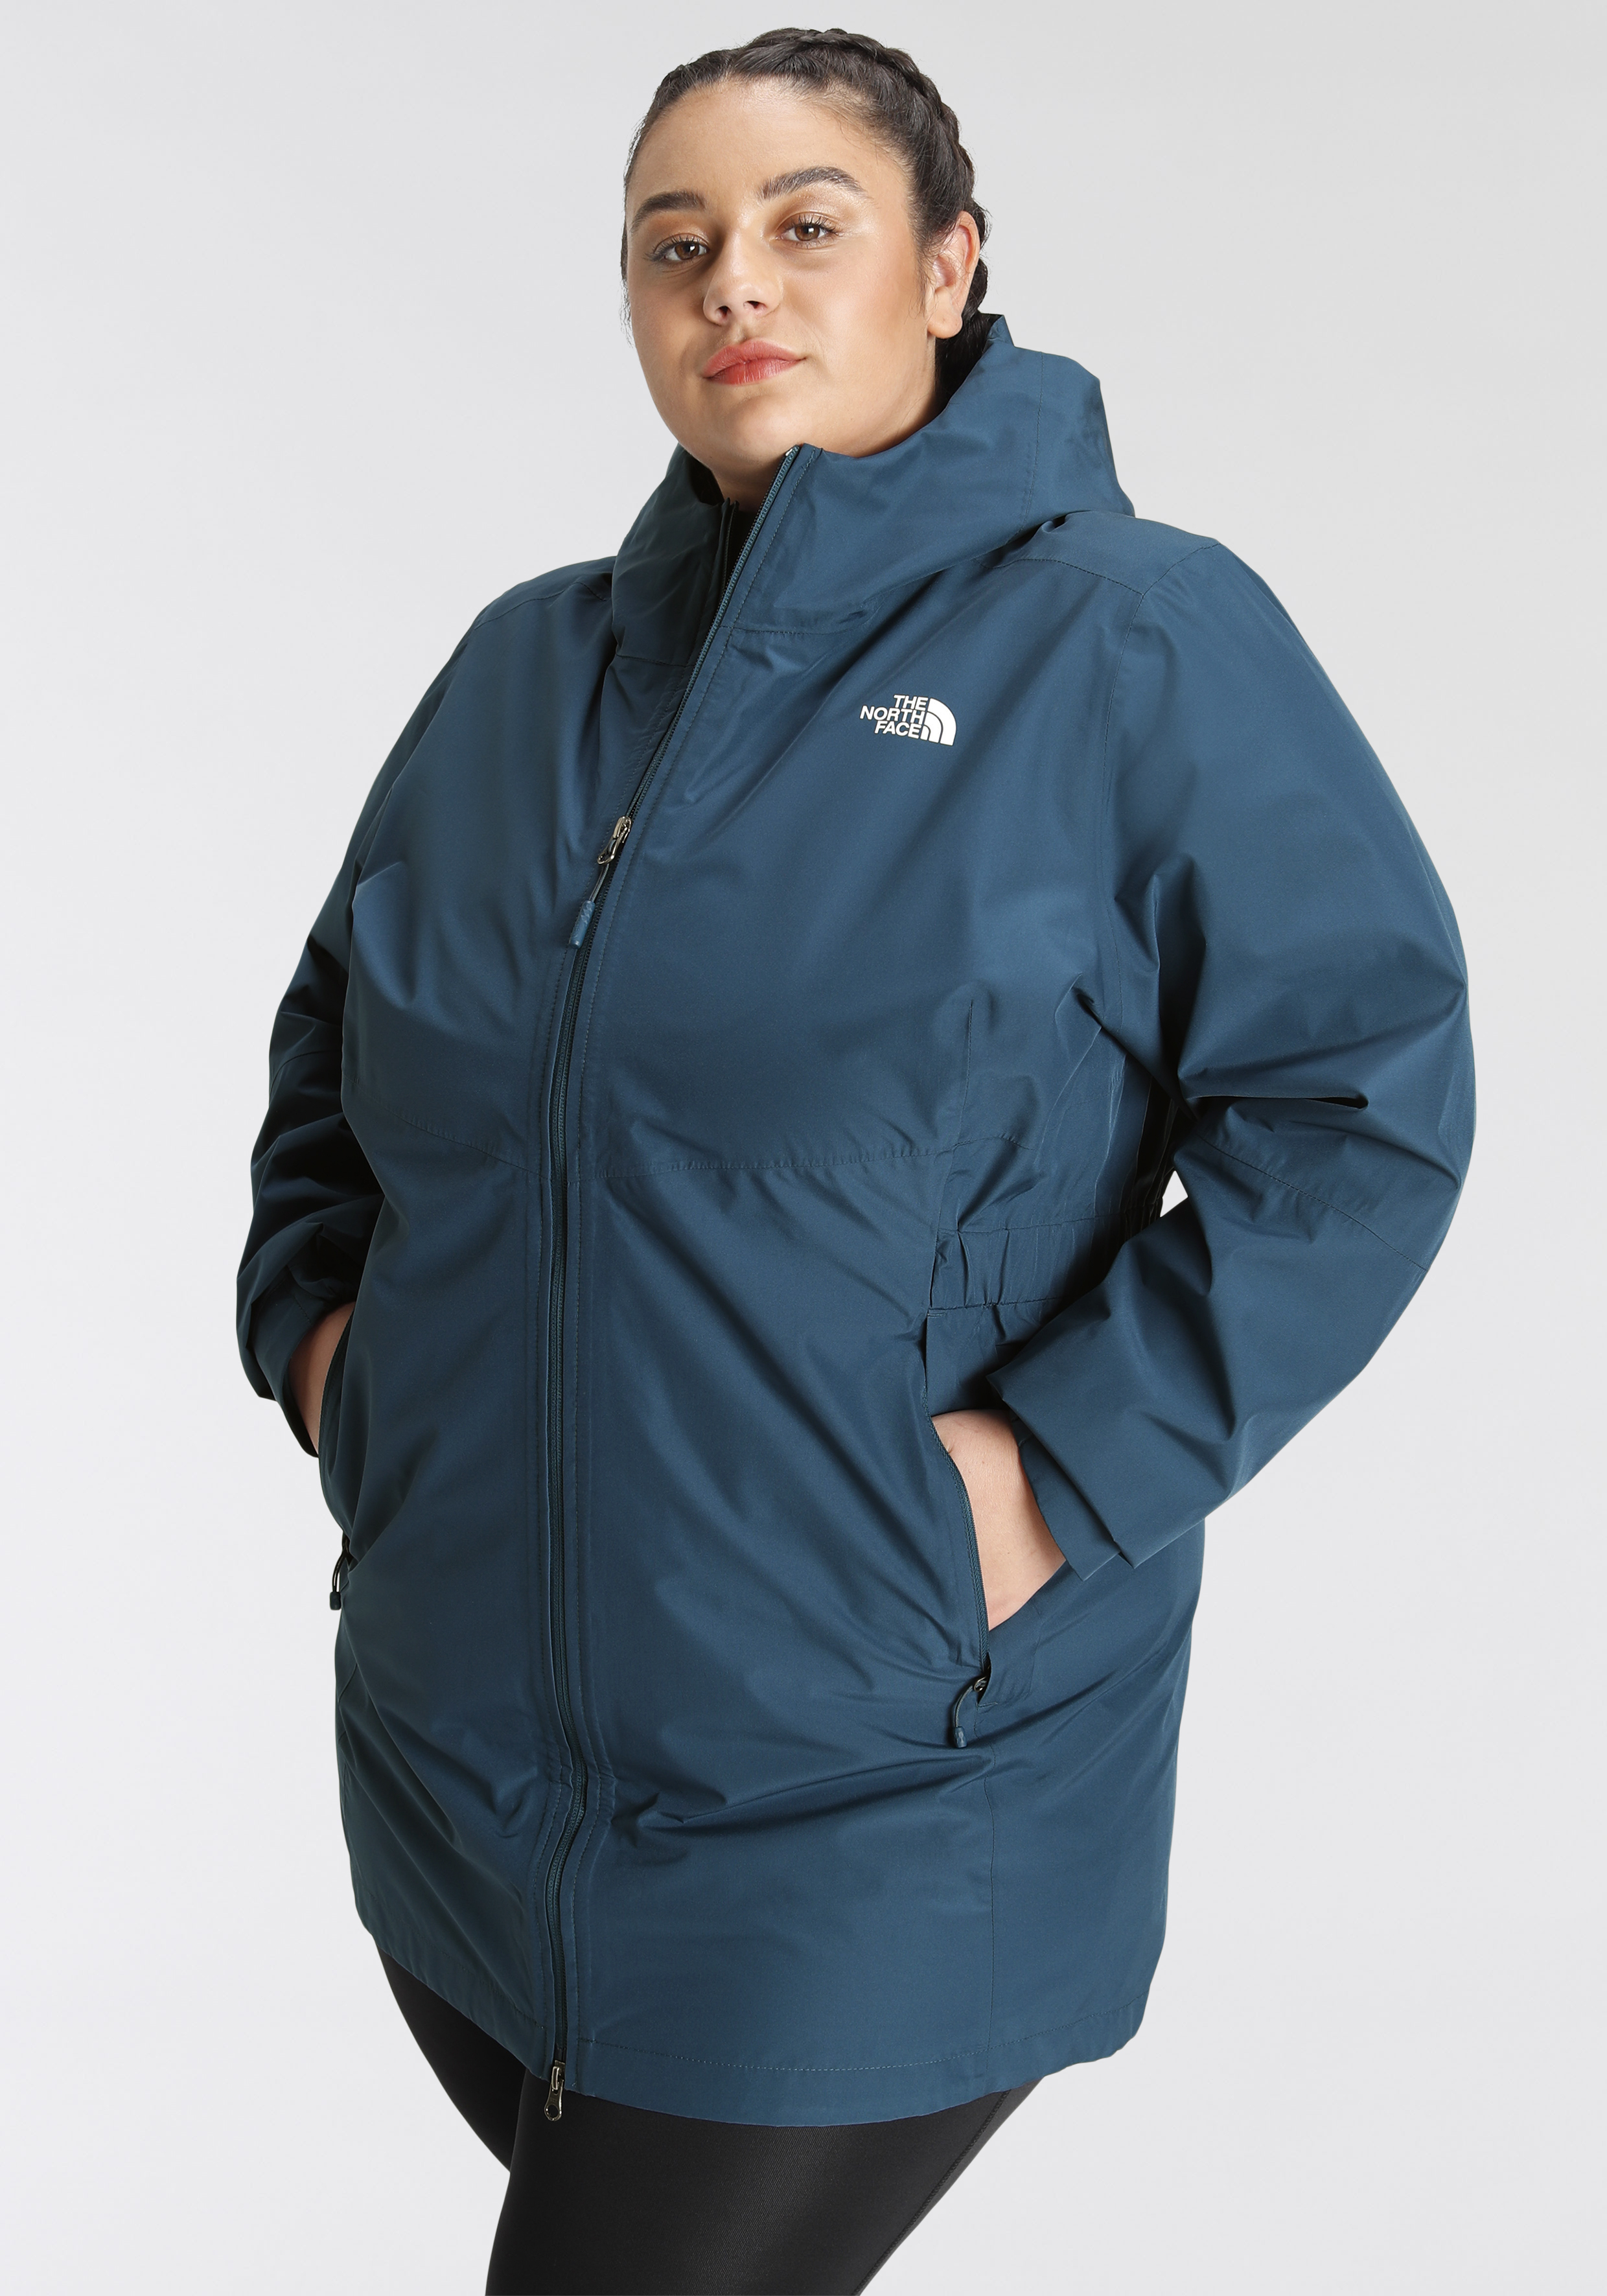 THE NORTH FACE Funktionsjacke in Marine 